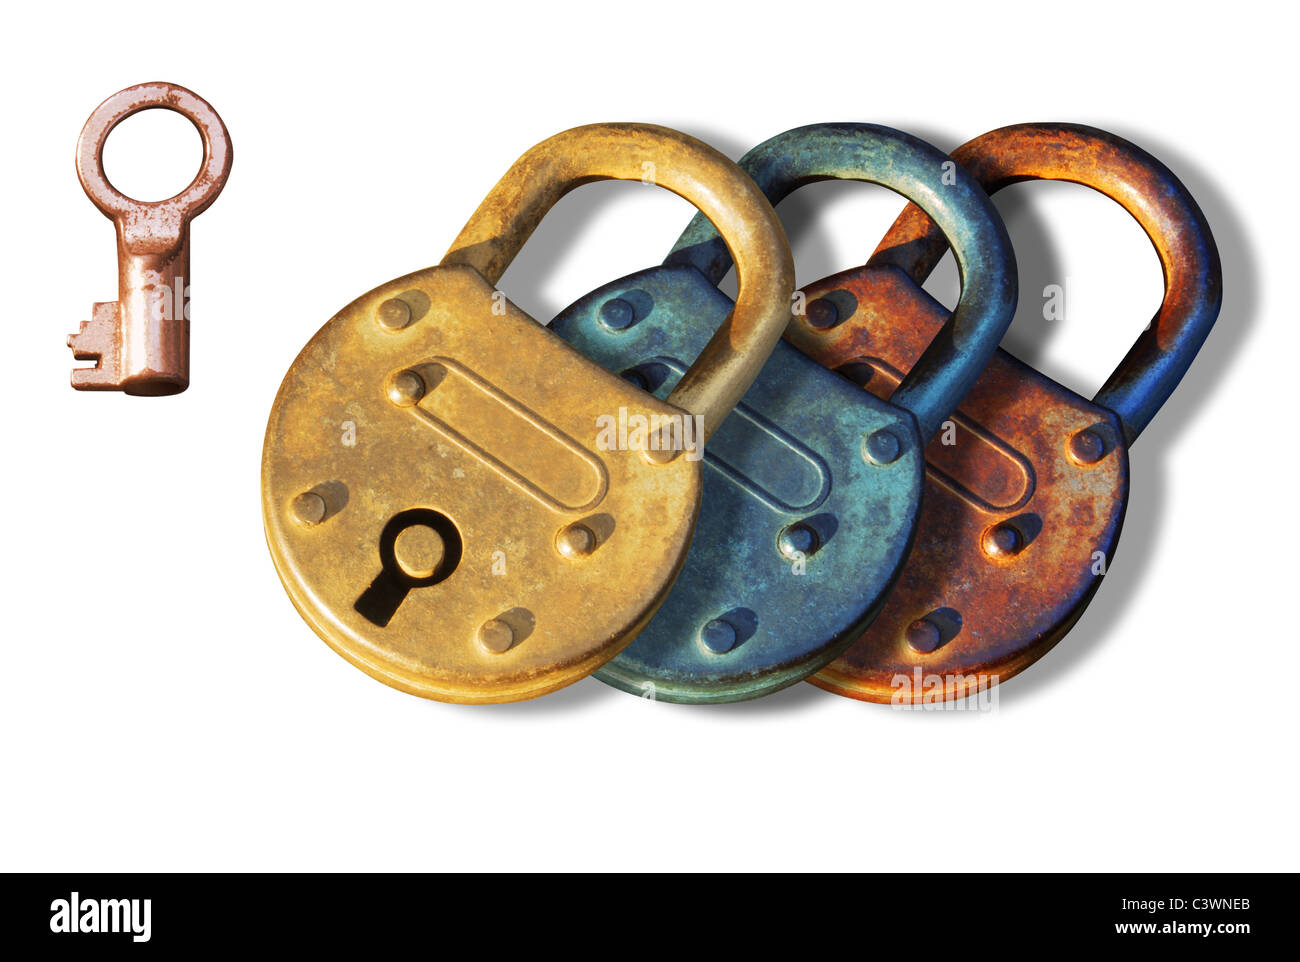 Antique Padlocks in different roughed metal surface with a key on their side. Isolated elements over white background. Stock Photo